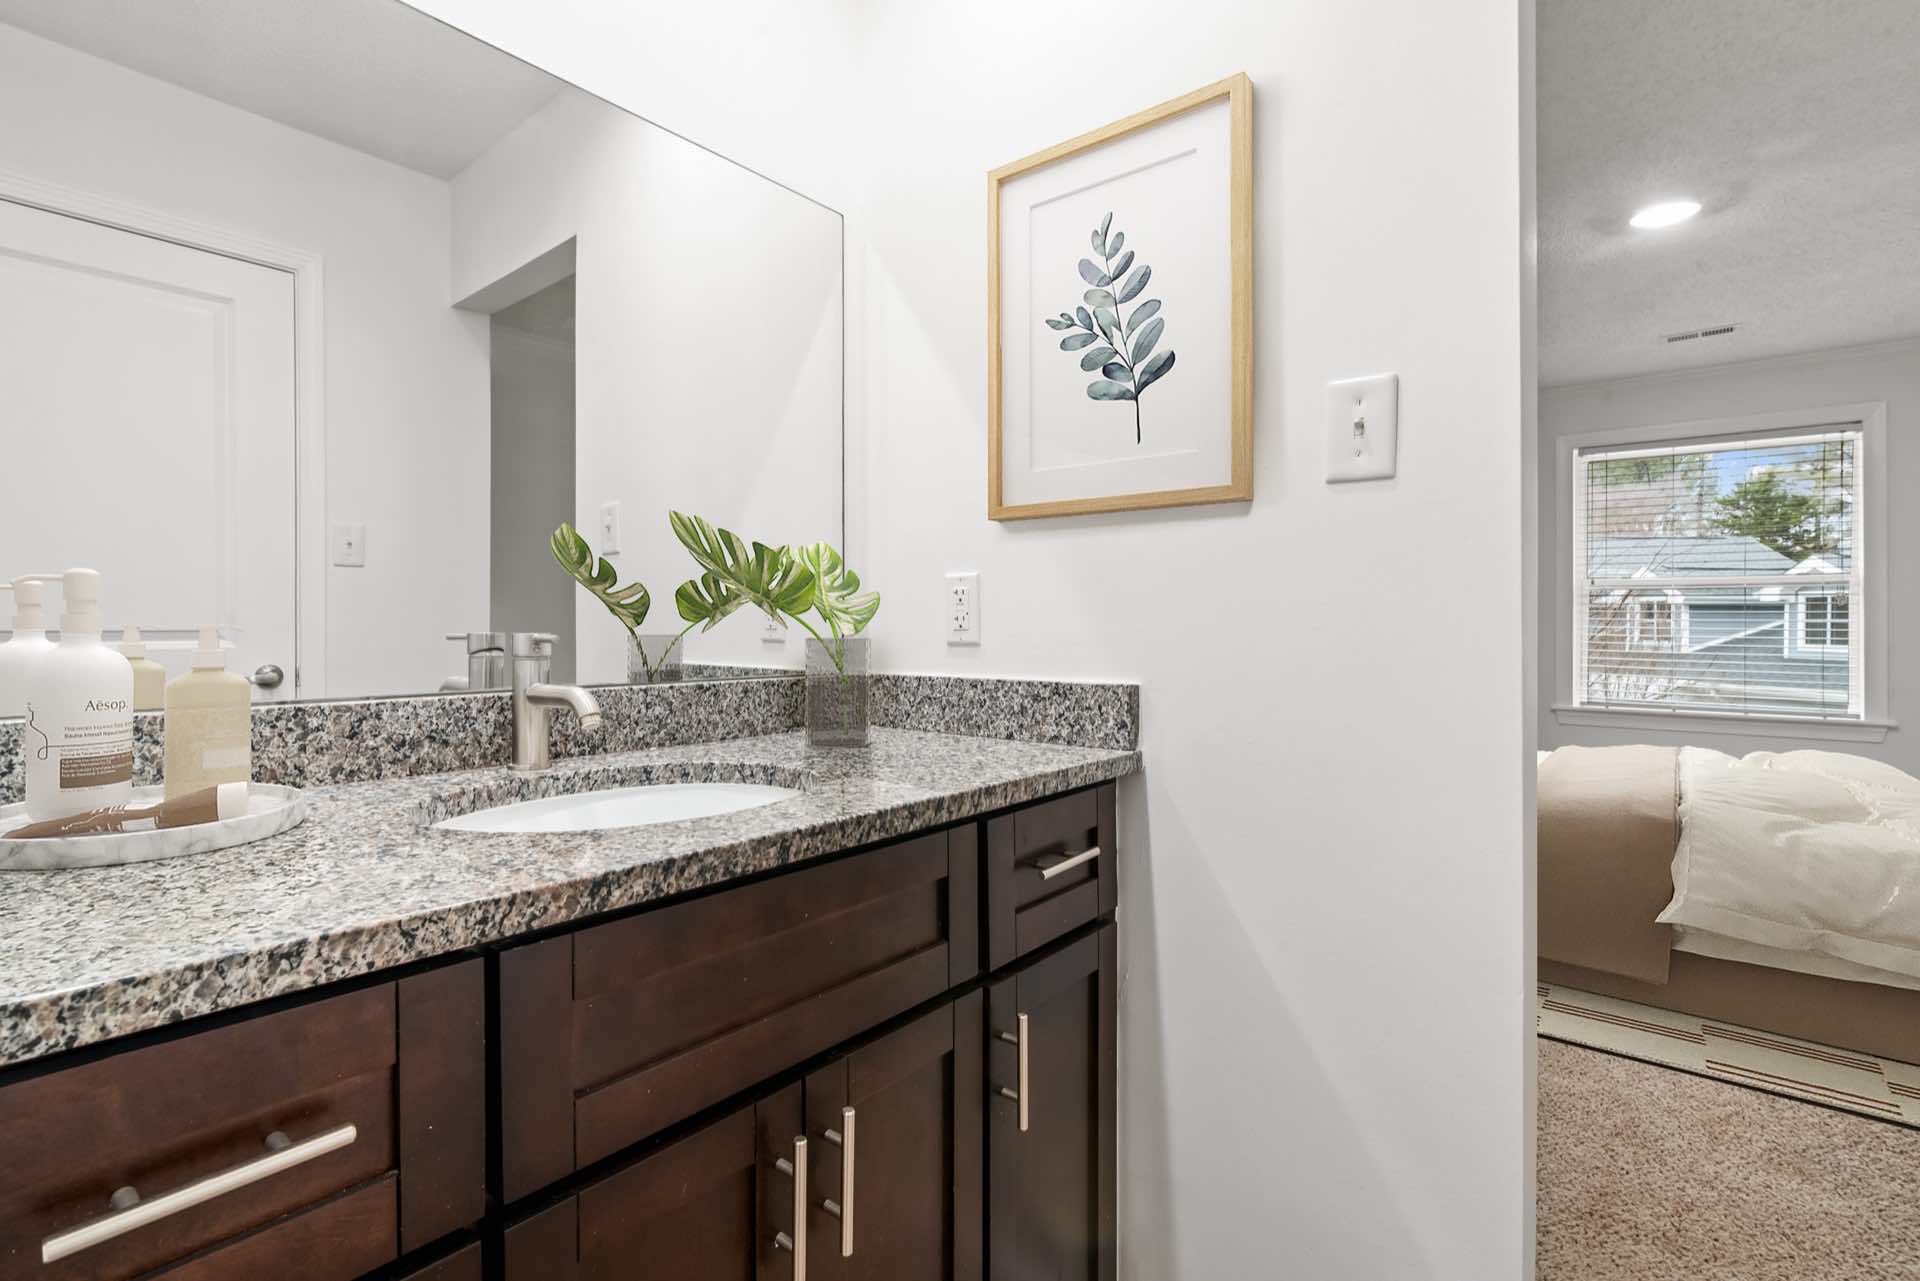 bathroom with granite counters and wall art